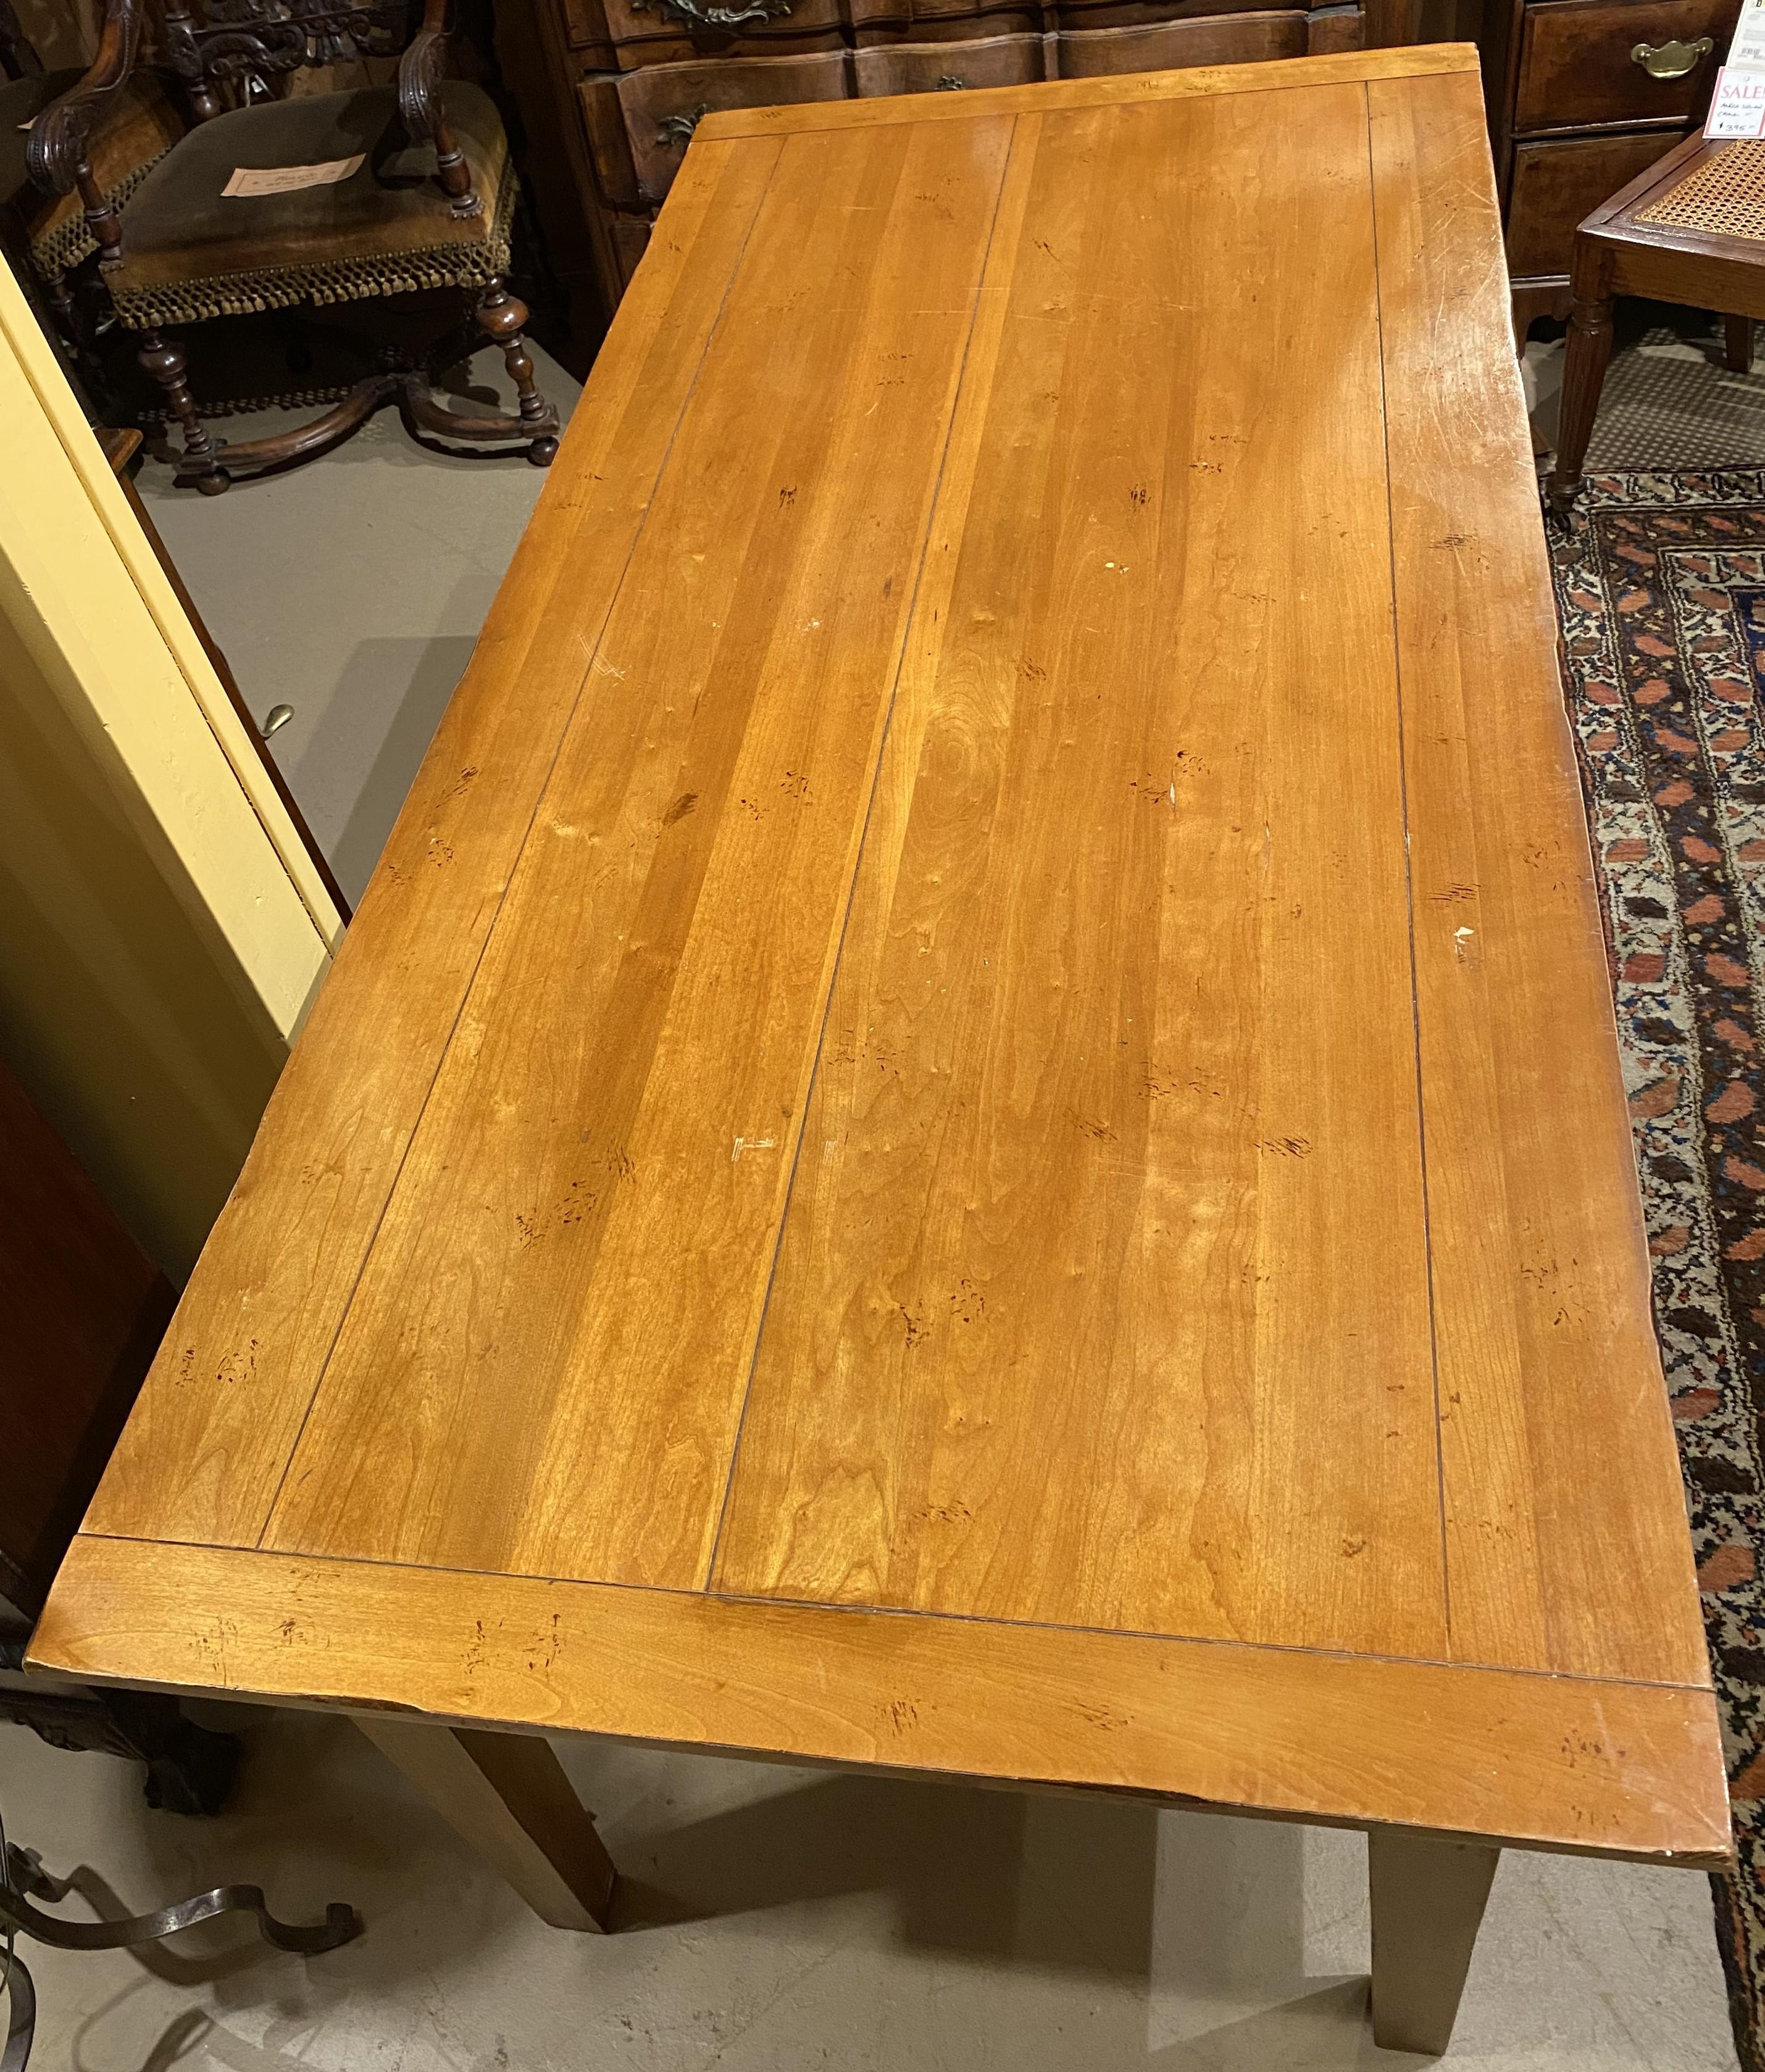 A fine cherry rectangular farm table with breadboard ends and tapered square legs. This solid farm table is in very good condition, with minor surface stains, scratches, light edge wear and other imperfections and wear commensurate with age and use.